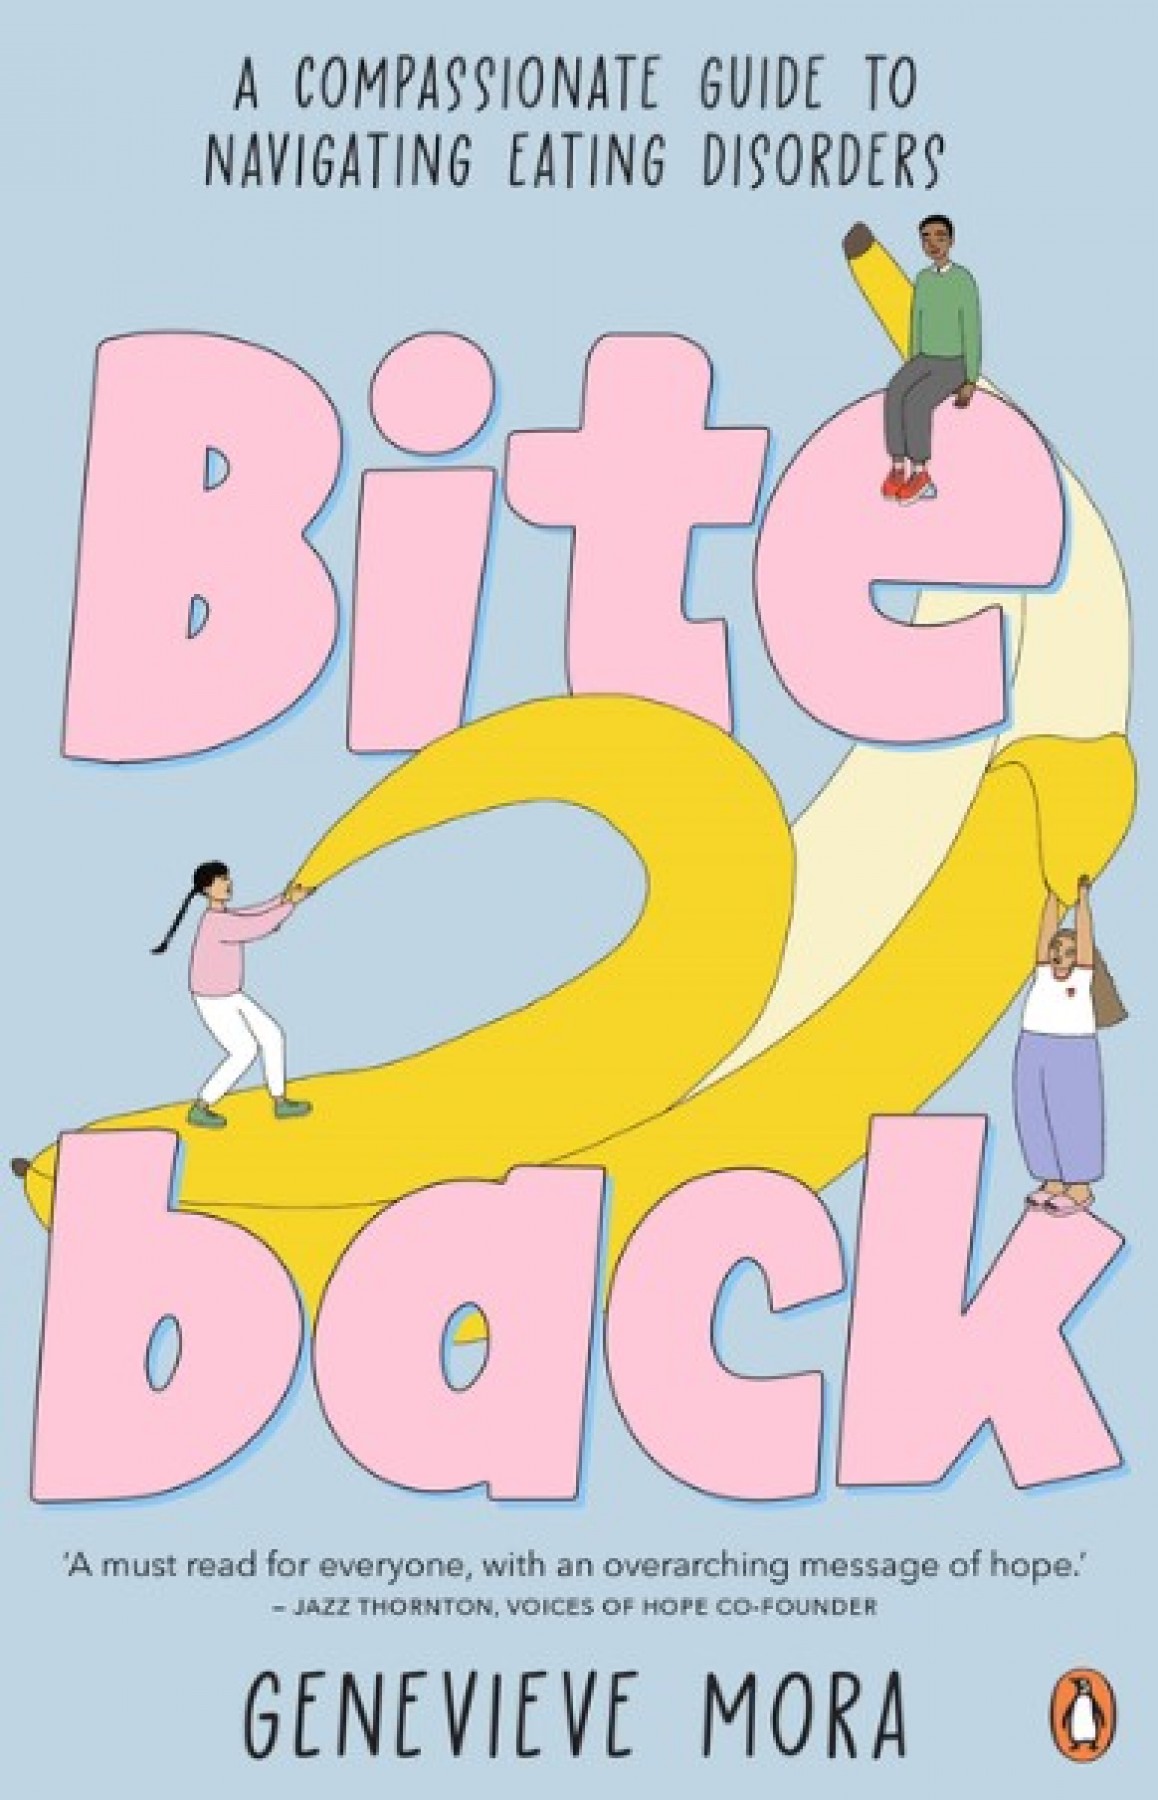 Bite Back: A compassionate guide to navigating eating disorders